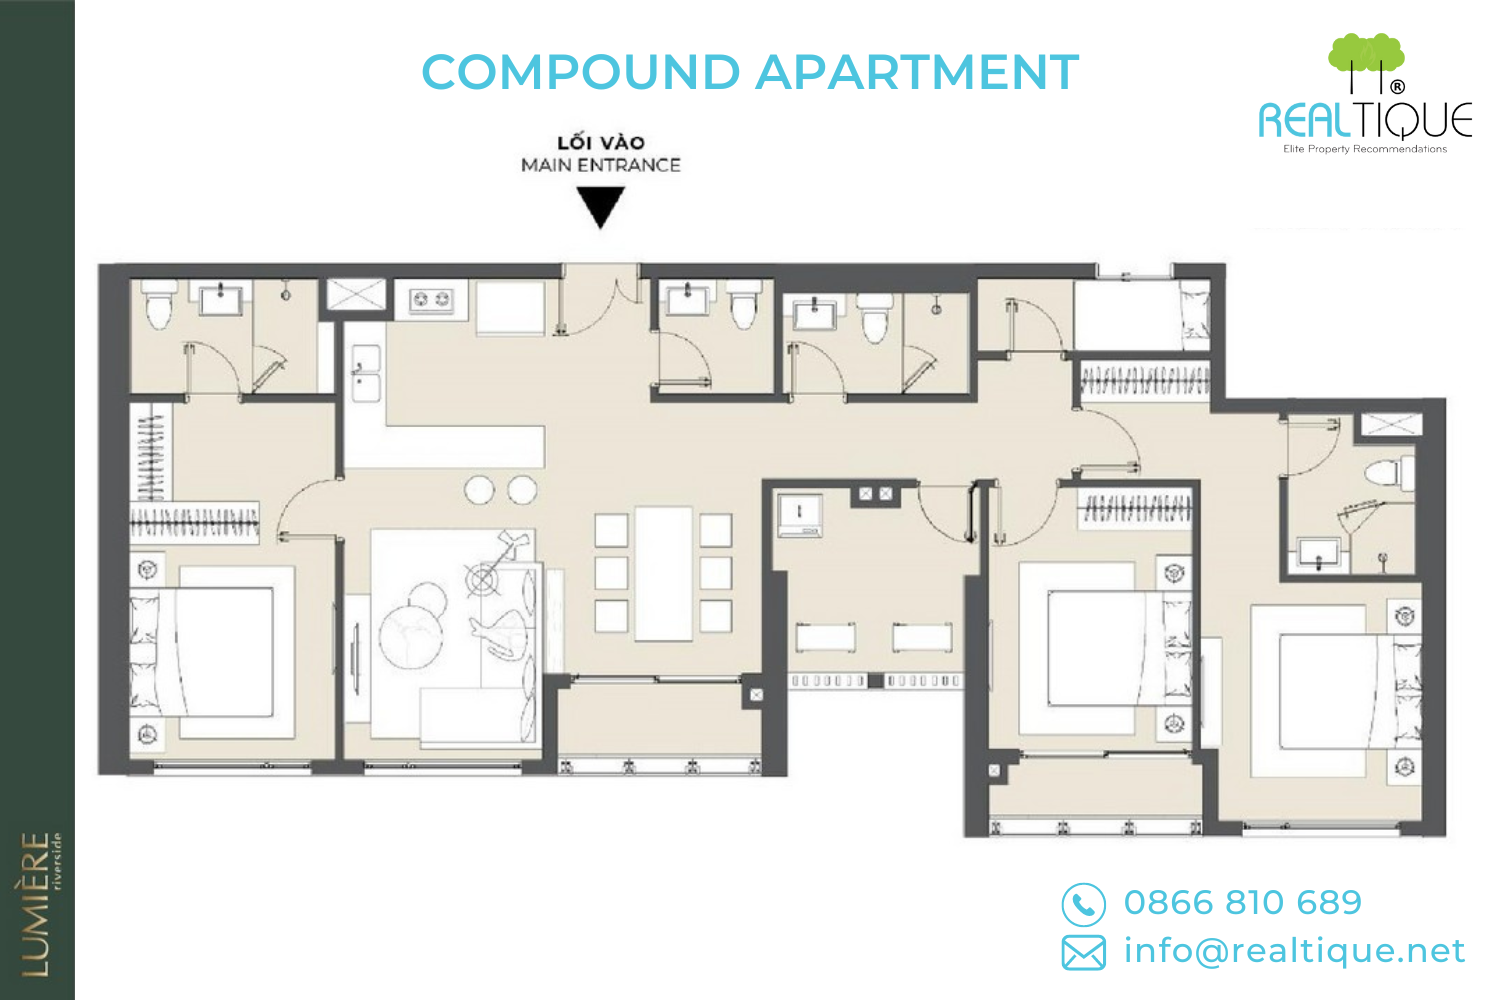 Floor plan of compound apartment in LUMIÈRE riverside project District 2